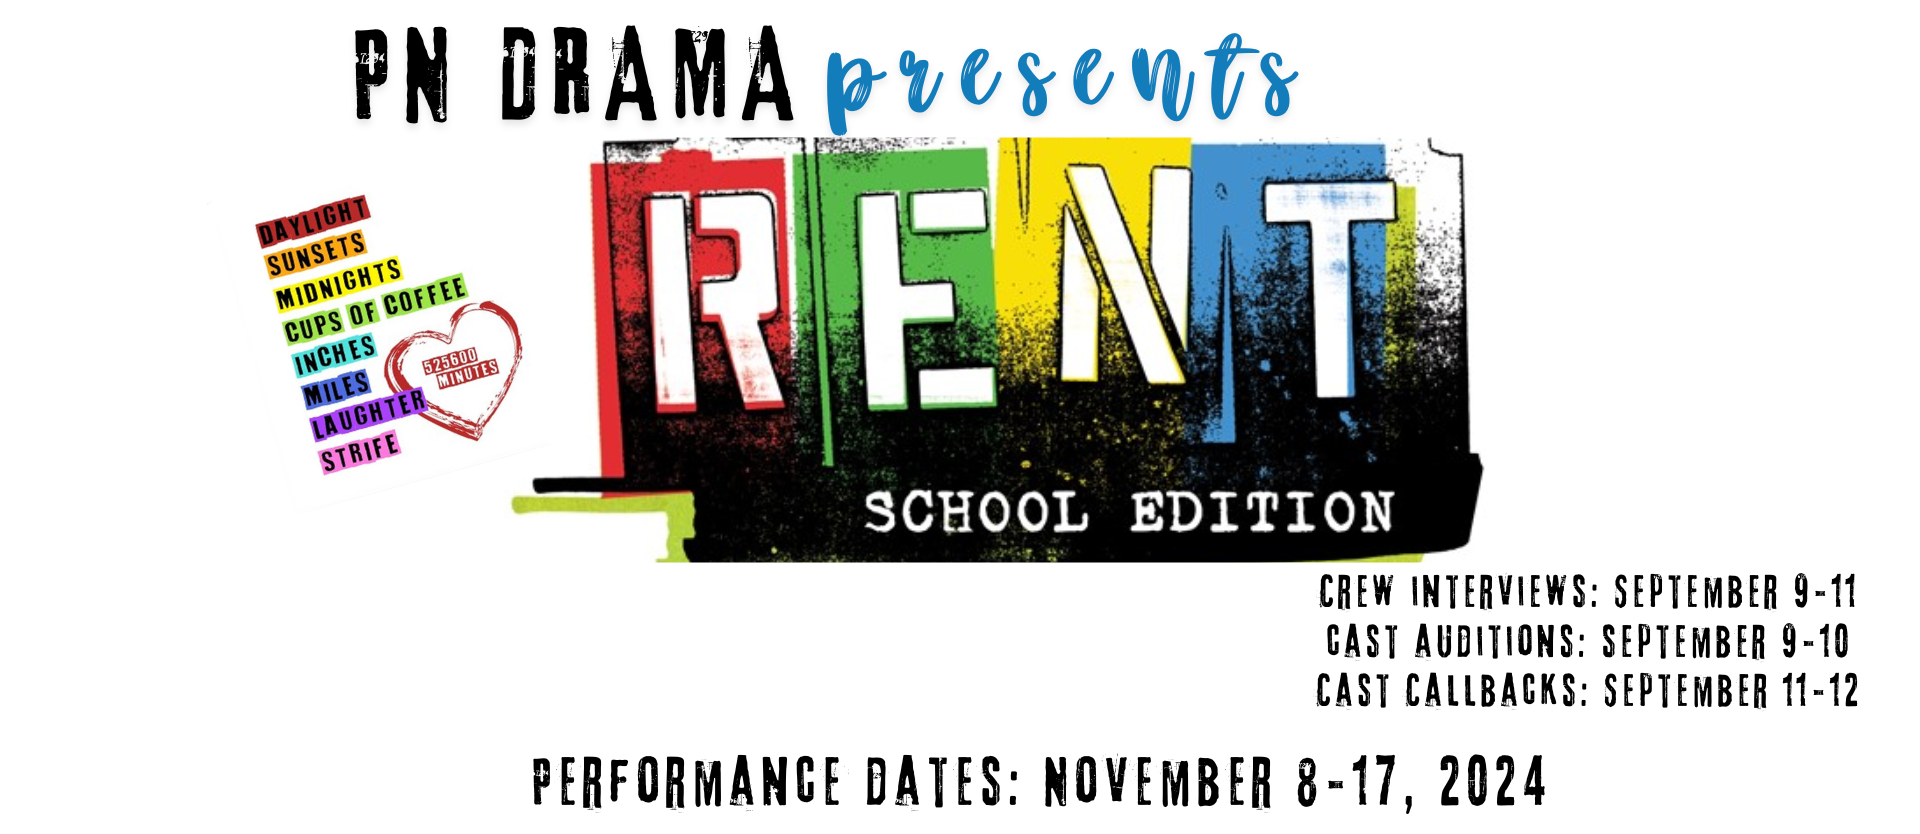 PN Drama presents Rent school edition daylights sunsets midnights cups of coffee inches miles laughter strife Crew interviews: September 9-11 cast auditions: september 9-10 Performance dates: November 8-17, 2024